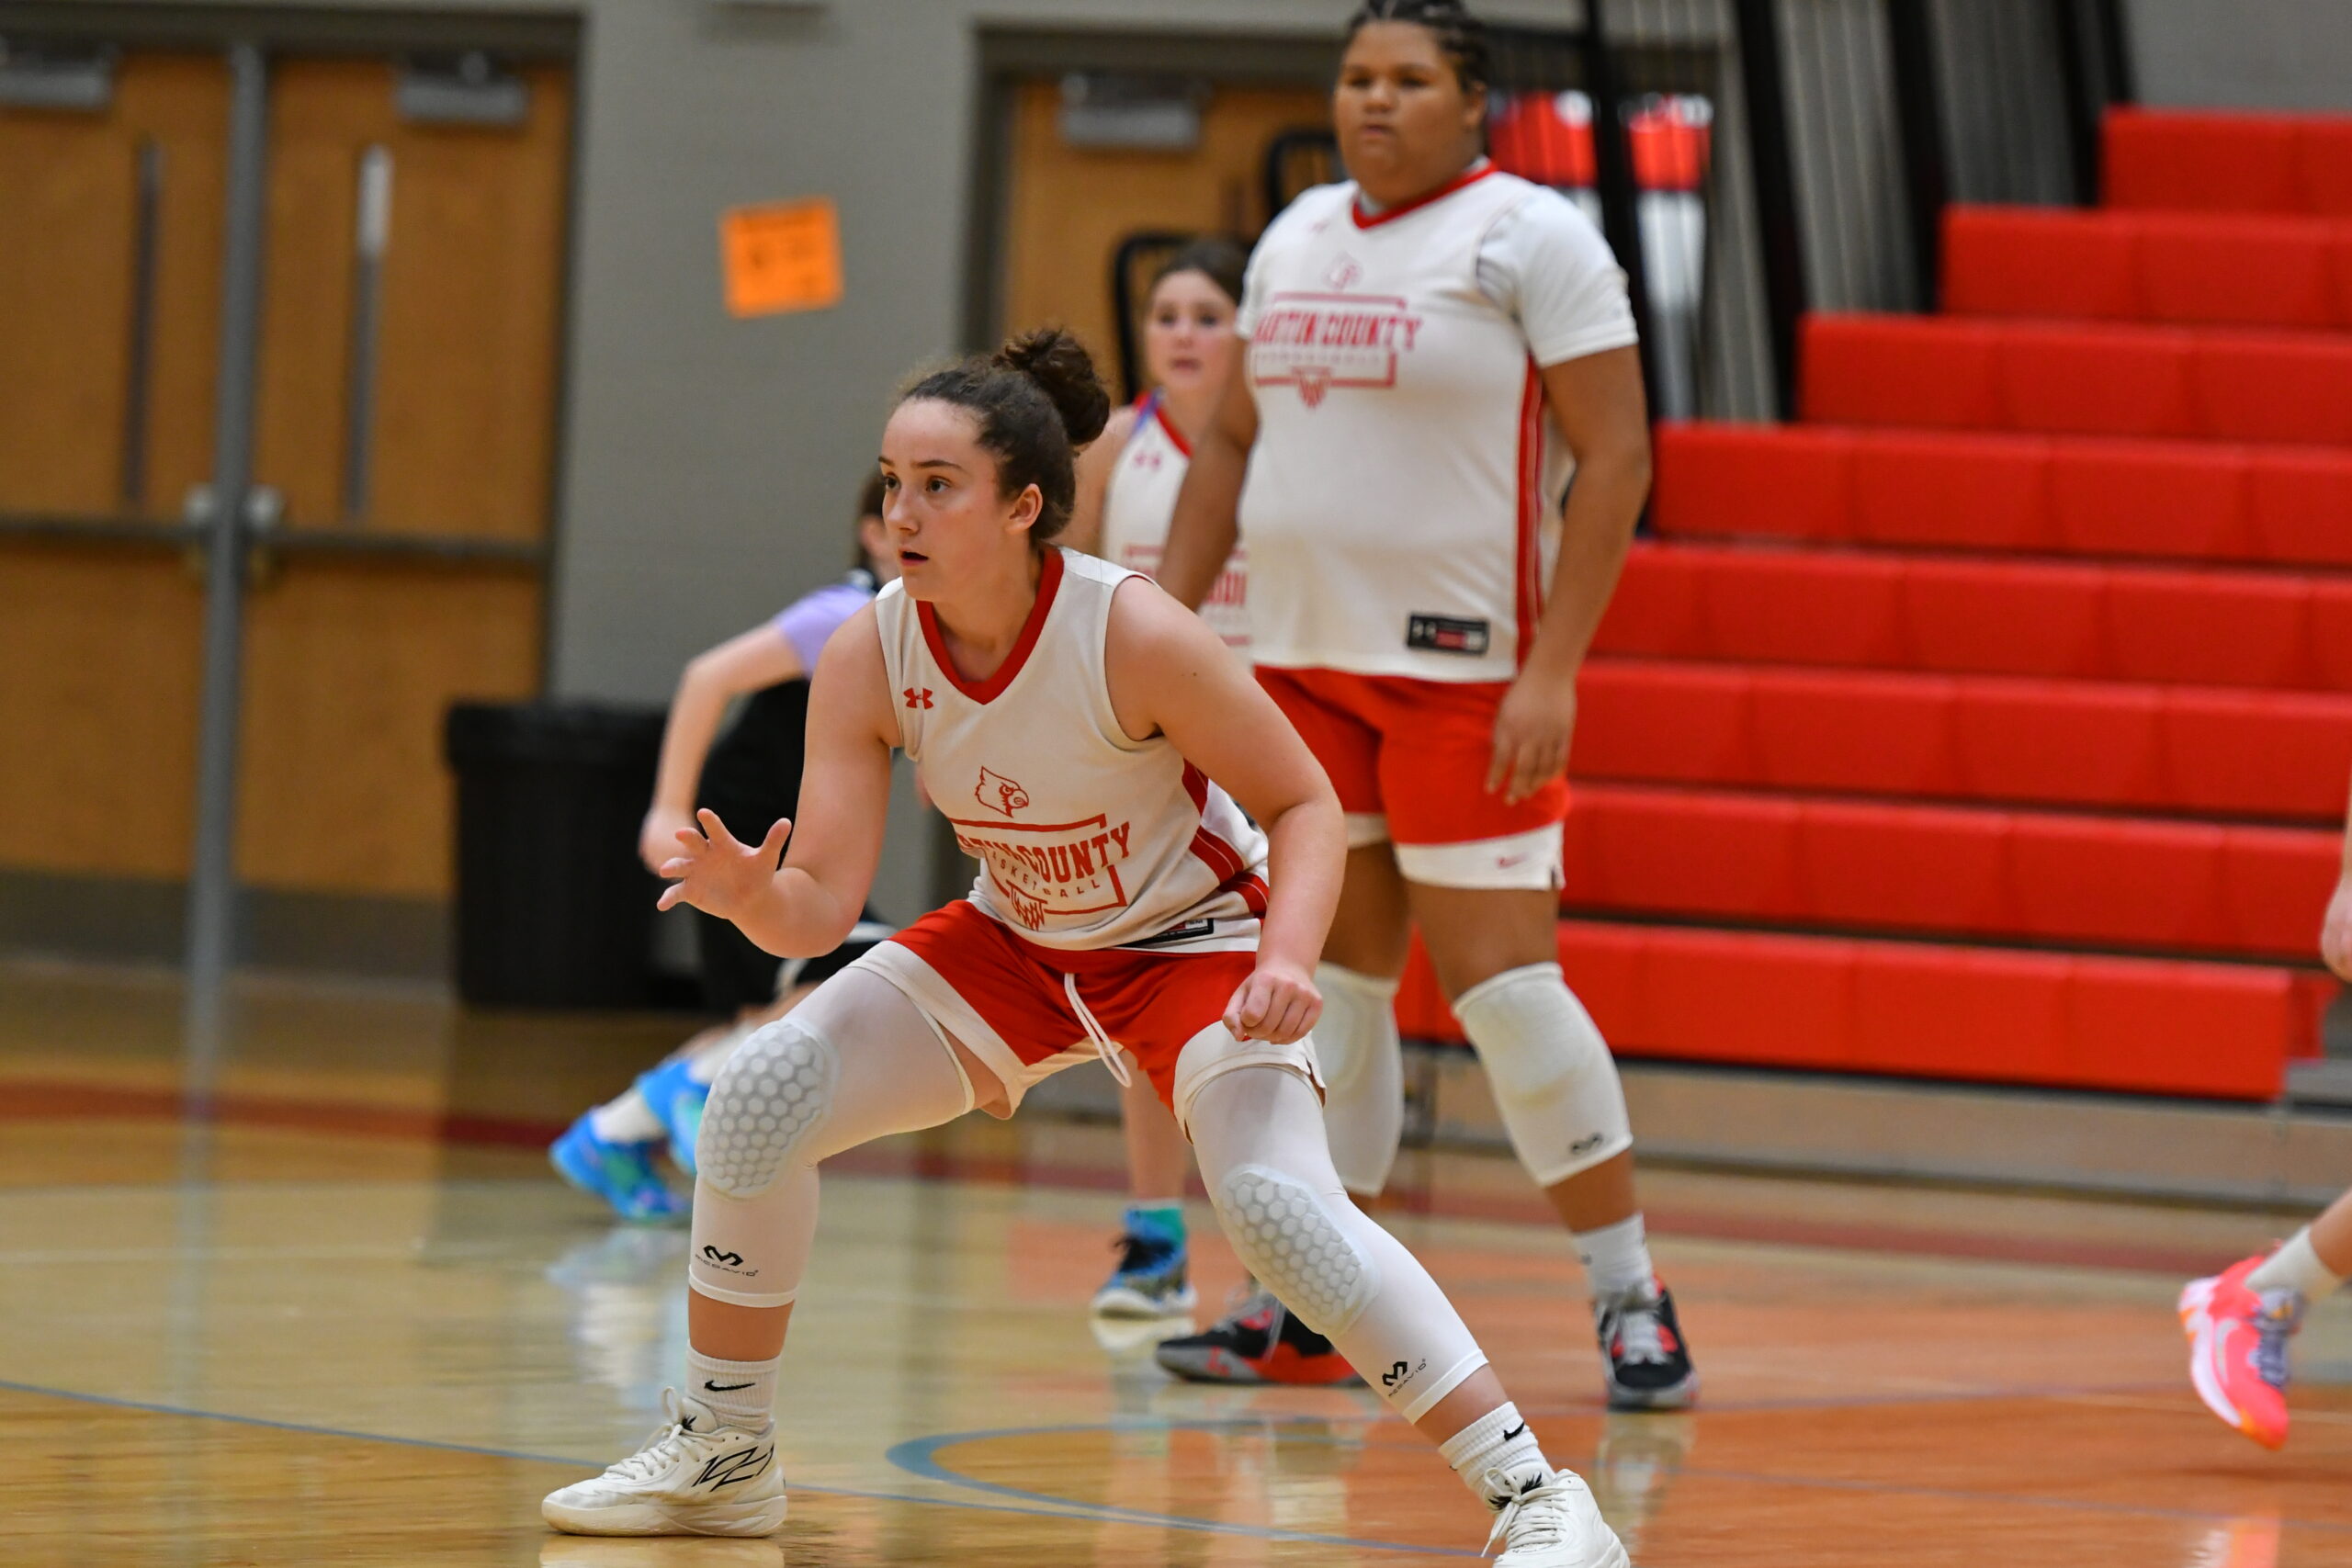 Martin County Middle School Lady Cards off to 7-0 start